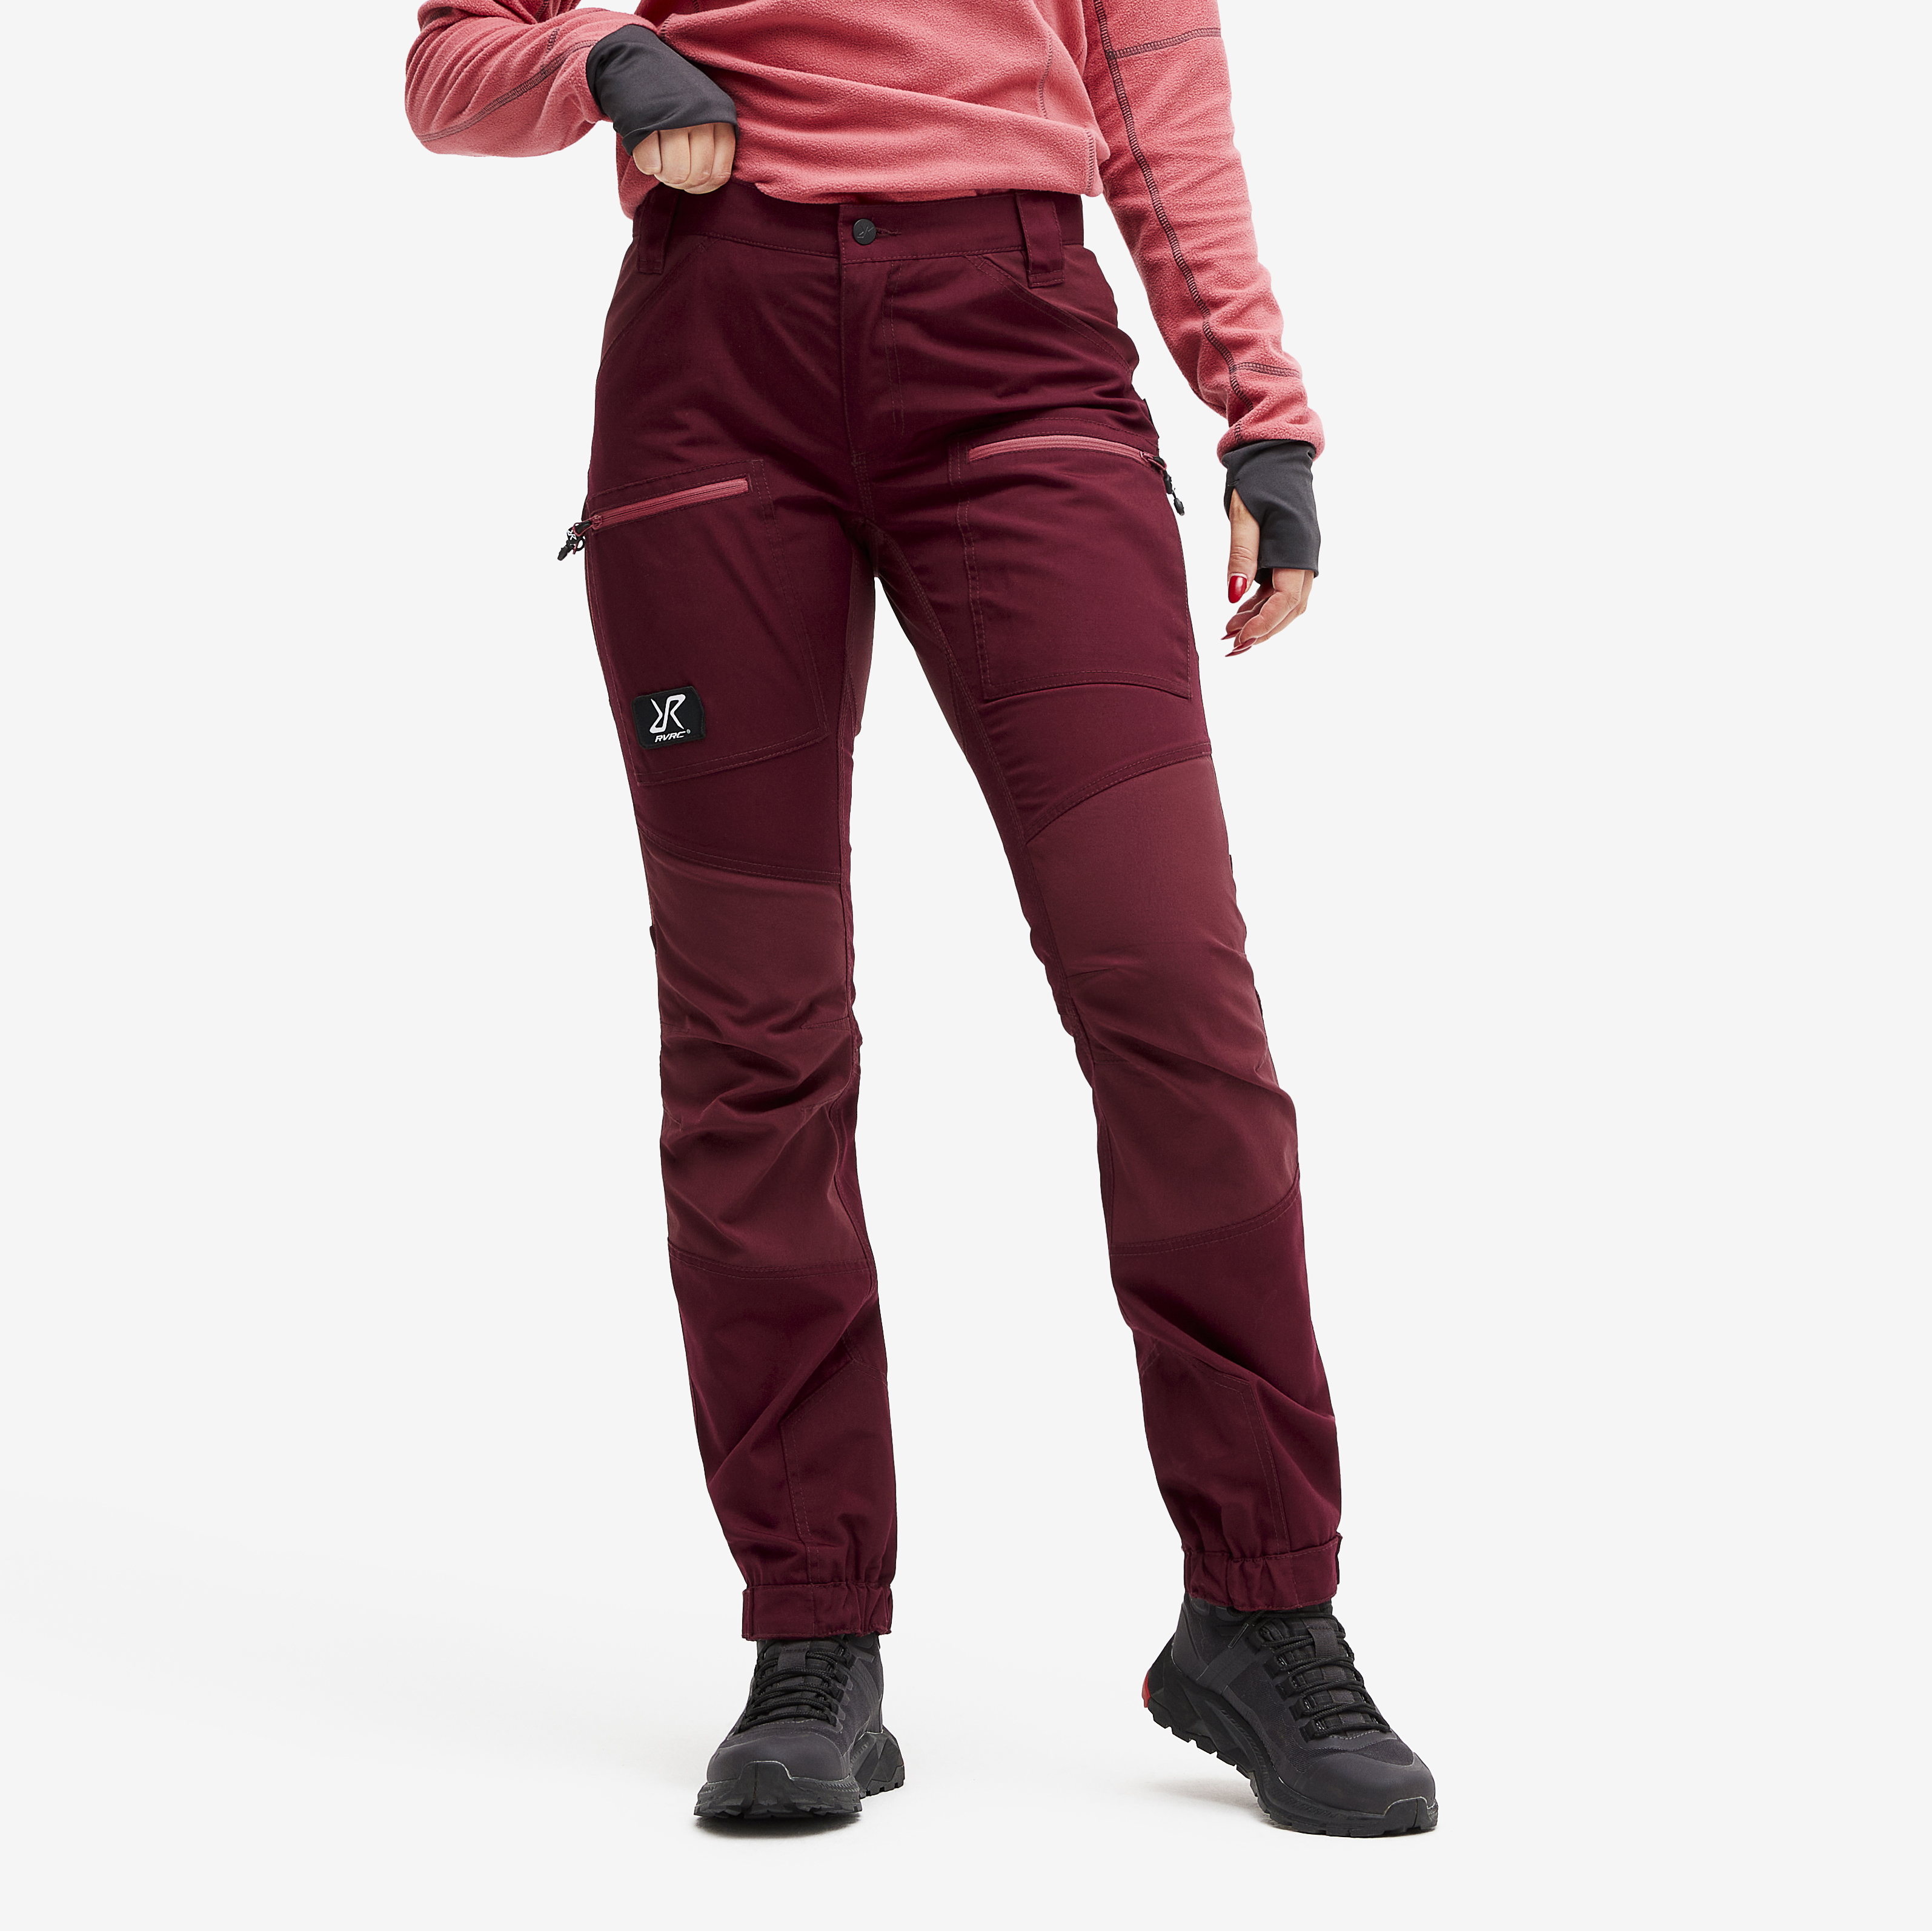 Nordwand Pro Pants Burgundy/Earth Red Dame